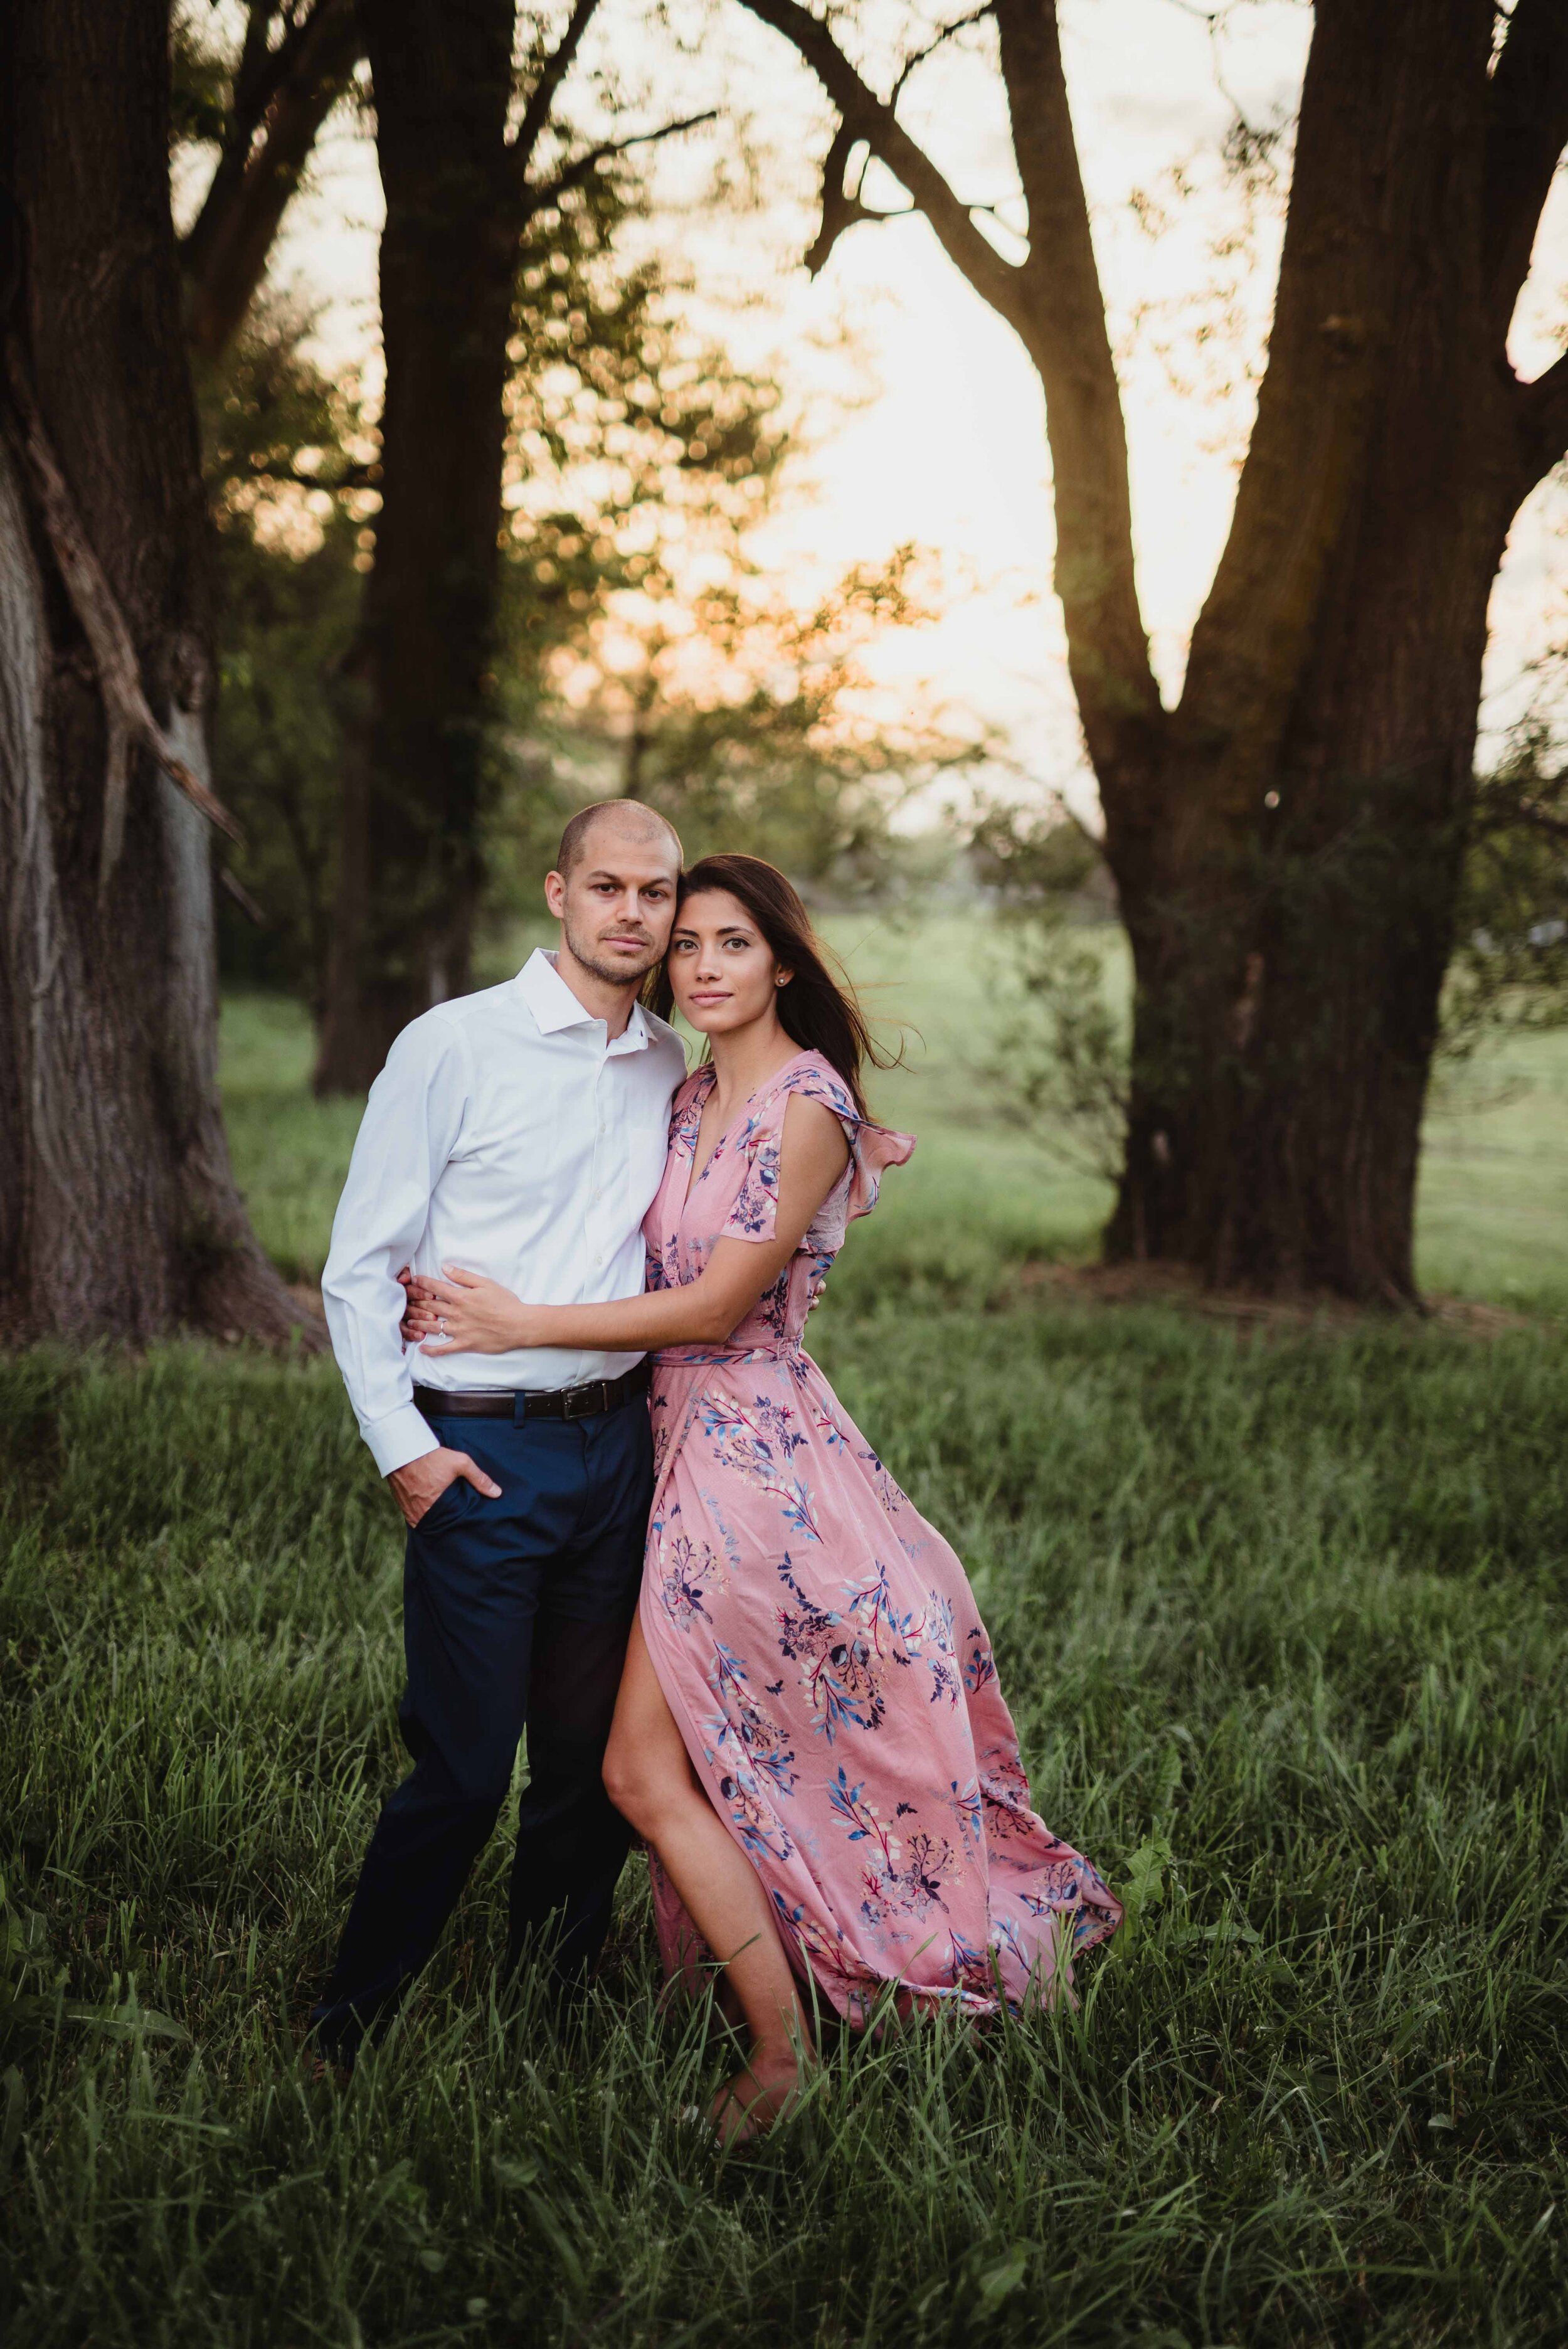 gorgeous engagement and wedding photography from Lafayette and West Lafayette’s premier wedding photographer.